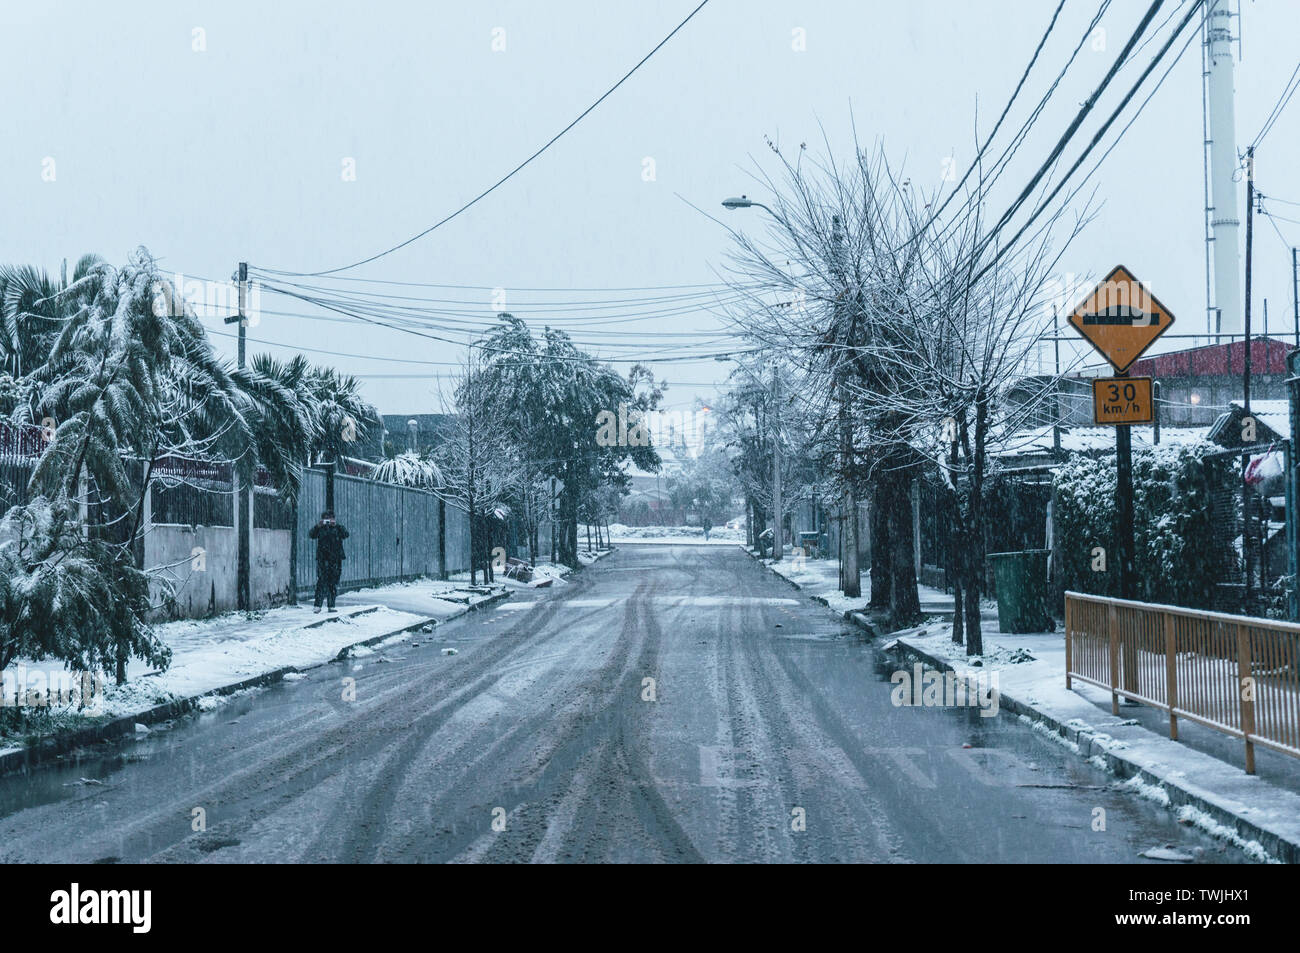 SANTIAGO, CHILE - JULY 2017: A road during a snowy day in Santiago Stock Photo